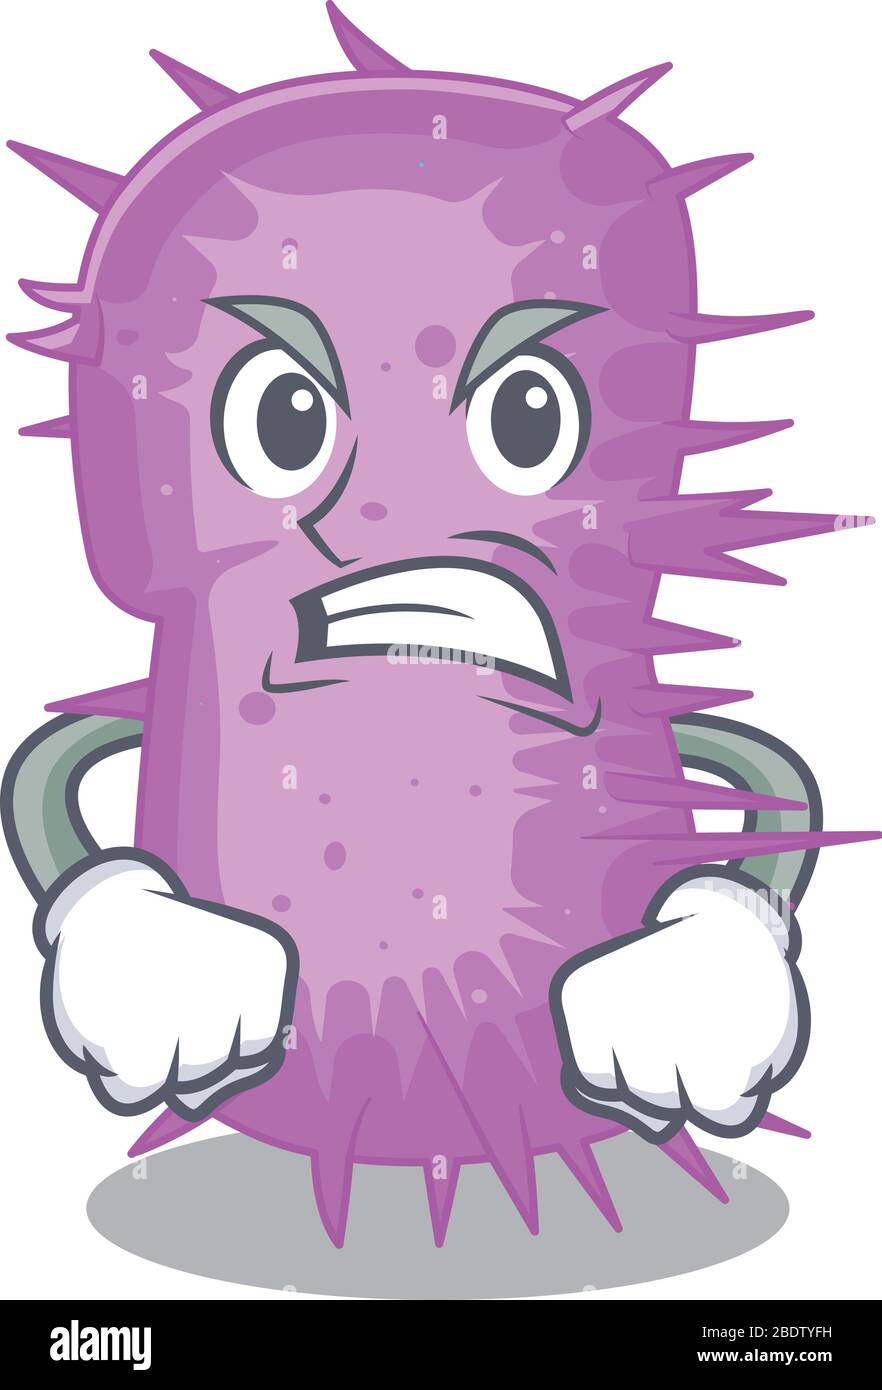 Mascot design concept of acinetobacter baumannii with angry face Stock Vector